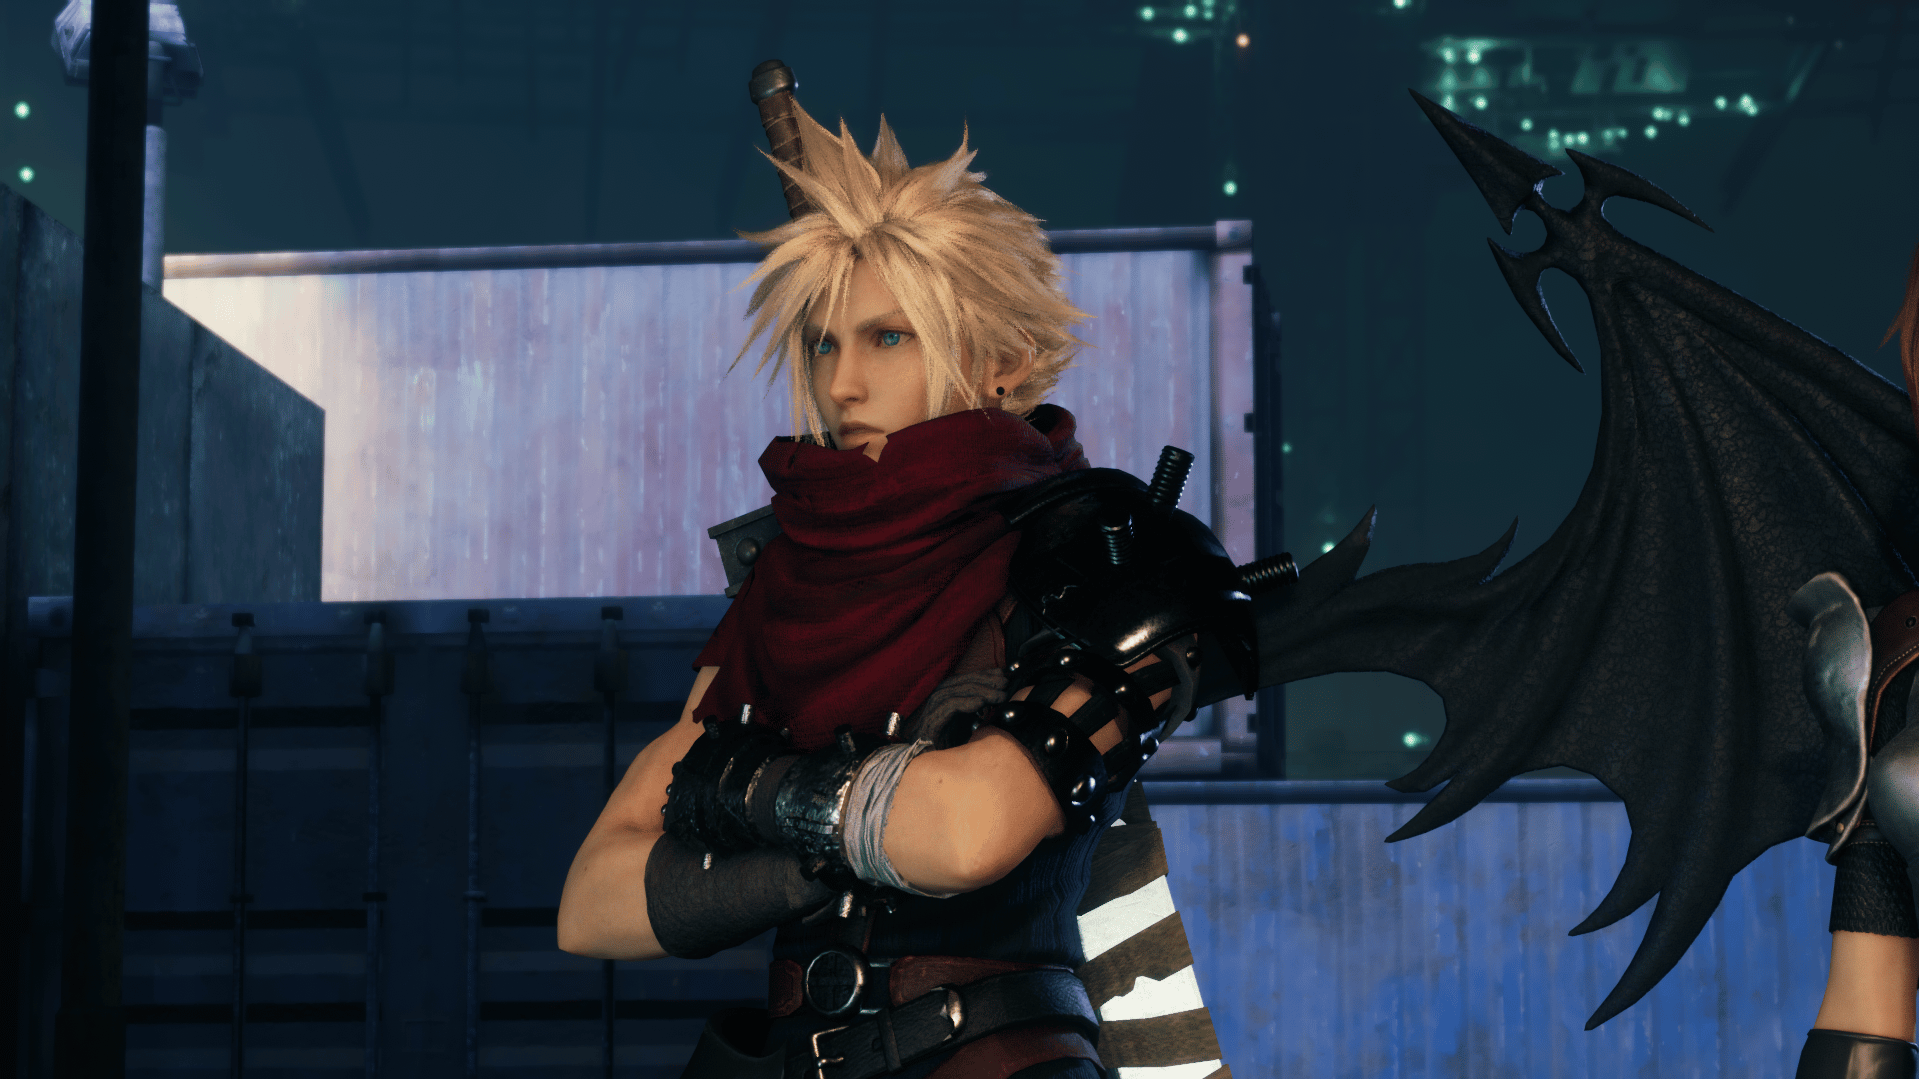 Cloud Looks So Fantastic In A Dress In These Final Fantasy VII Remake Mods